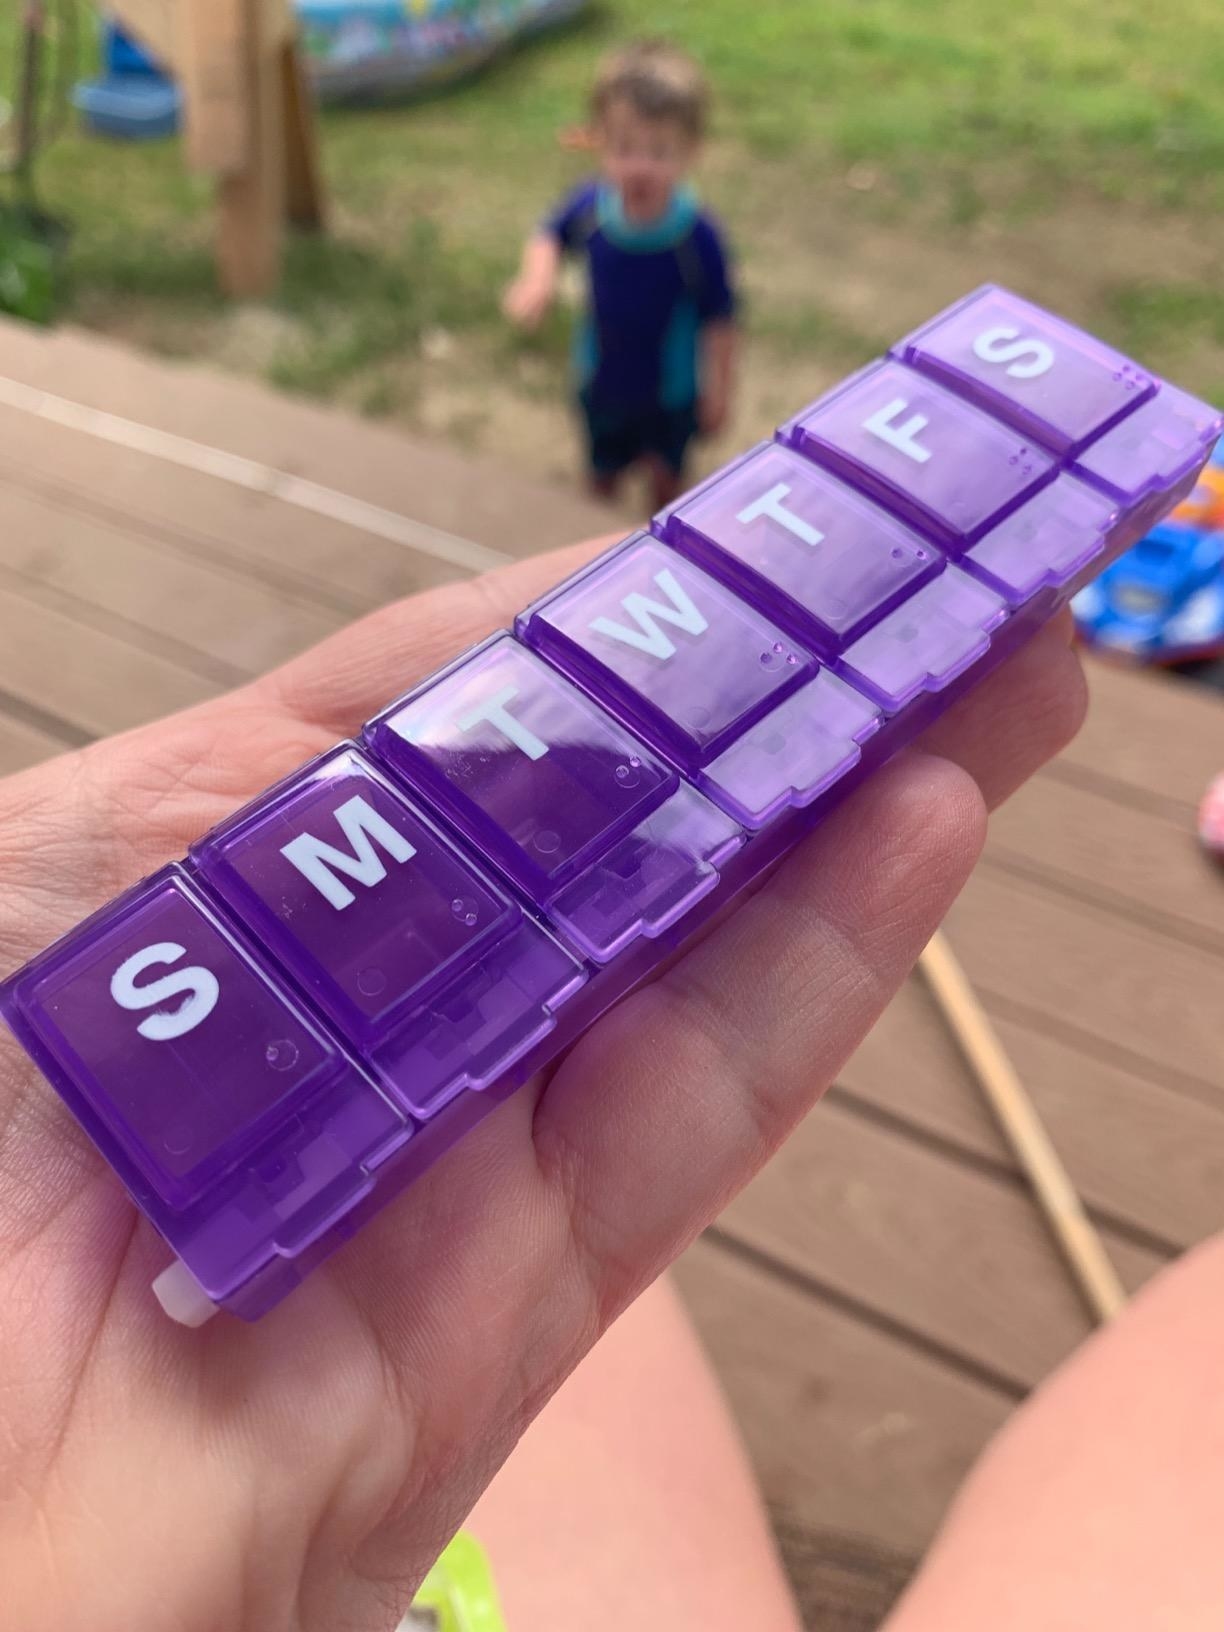 reviewer's photo of them holding the purple box with a child in the background